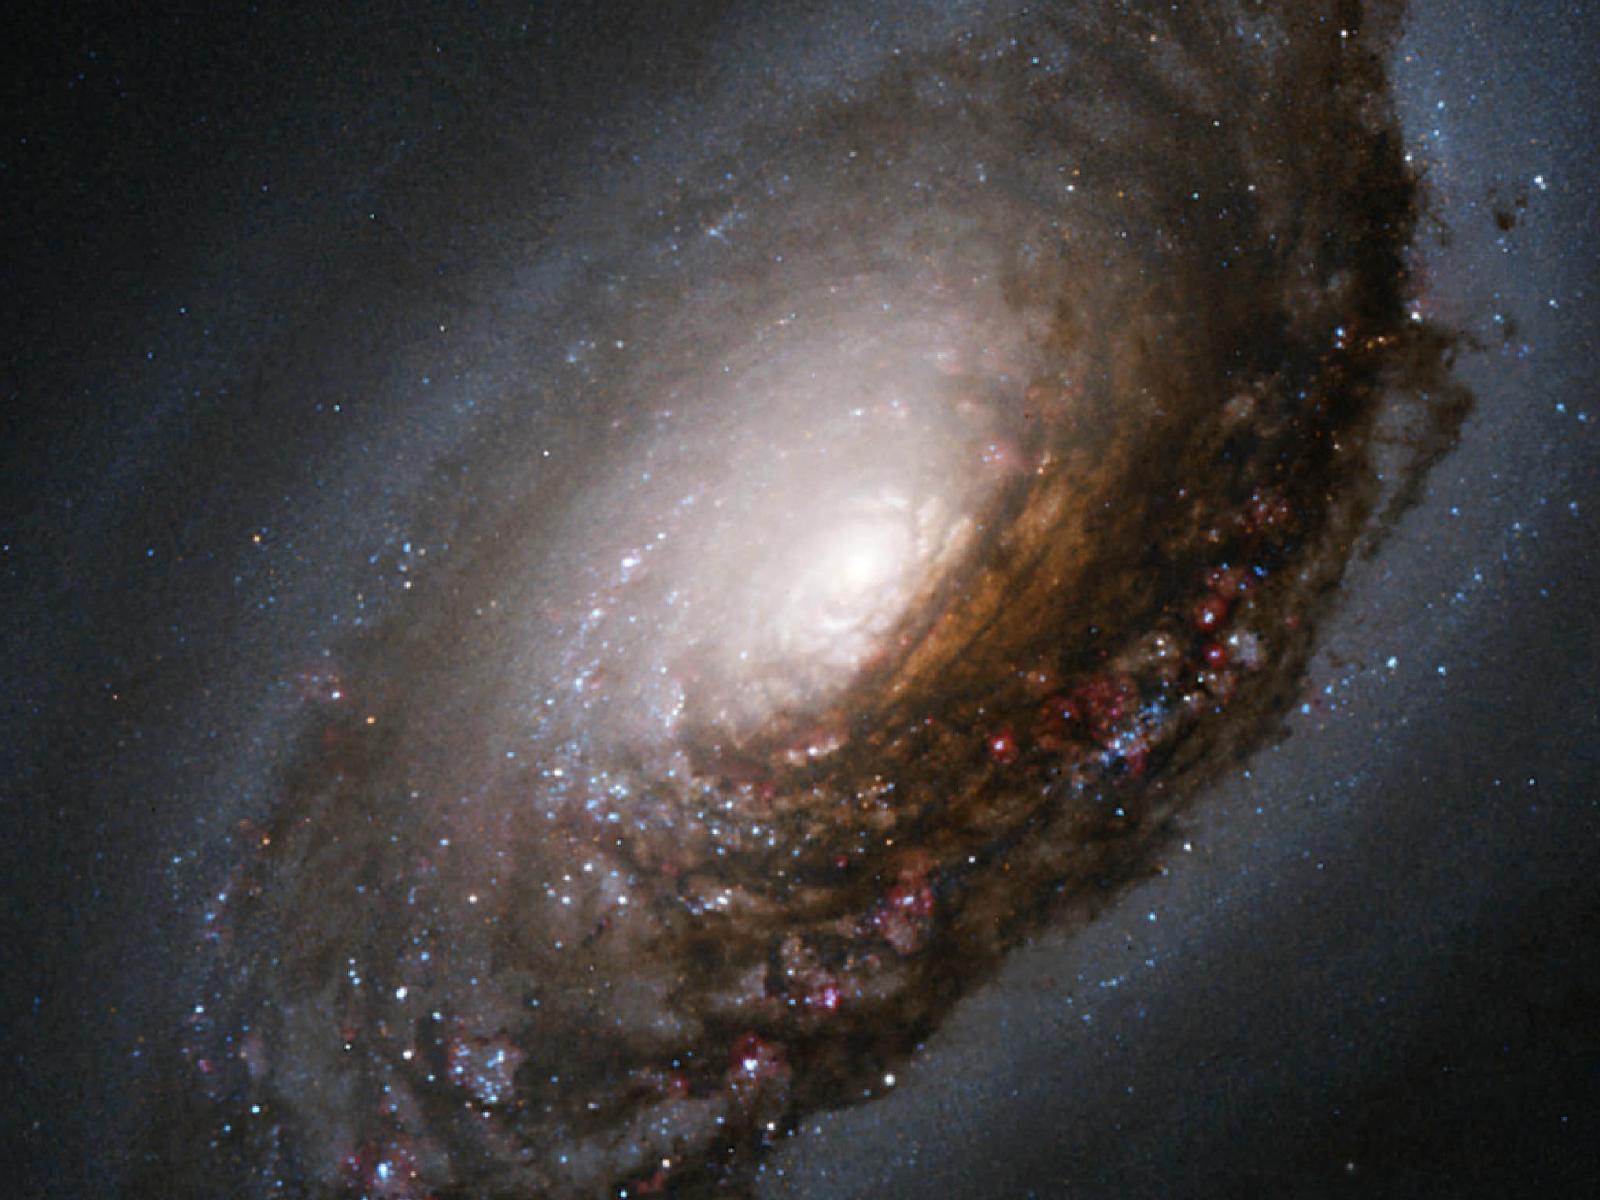 M64 the "evil eye galaxy" located roughly 17 million light years away.